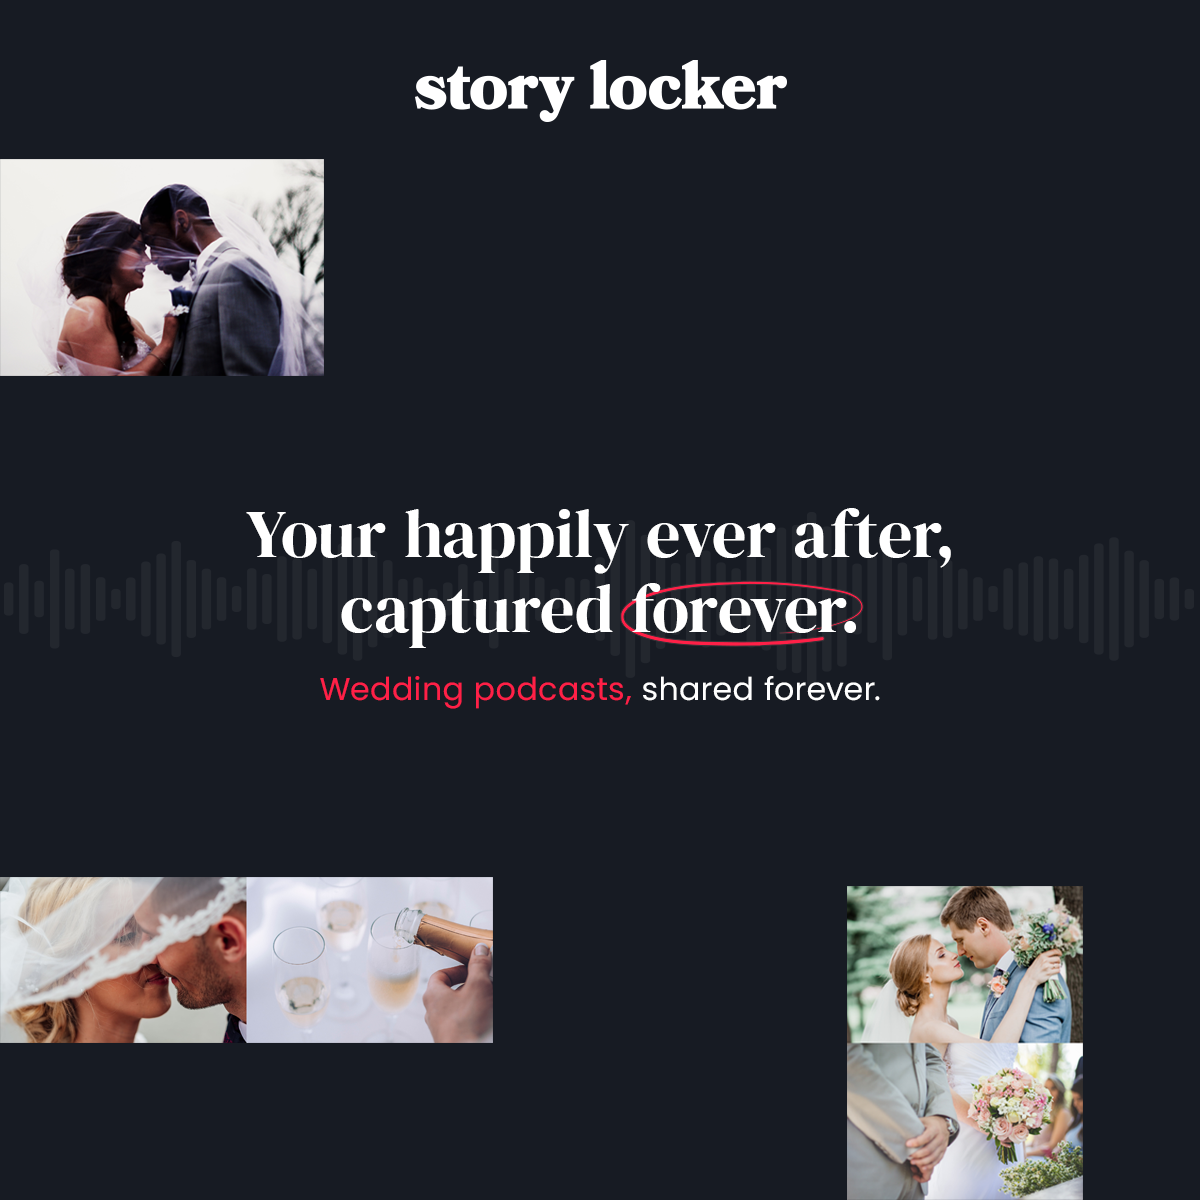 story locker wedding podcast graphic saying your happily ever after captured forever